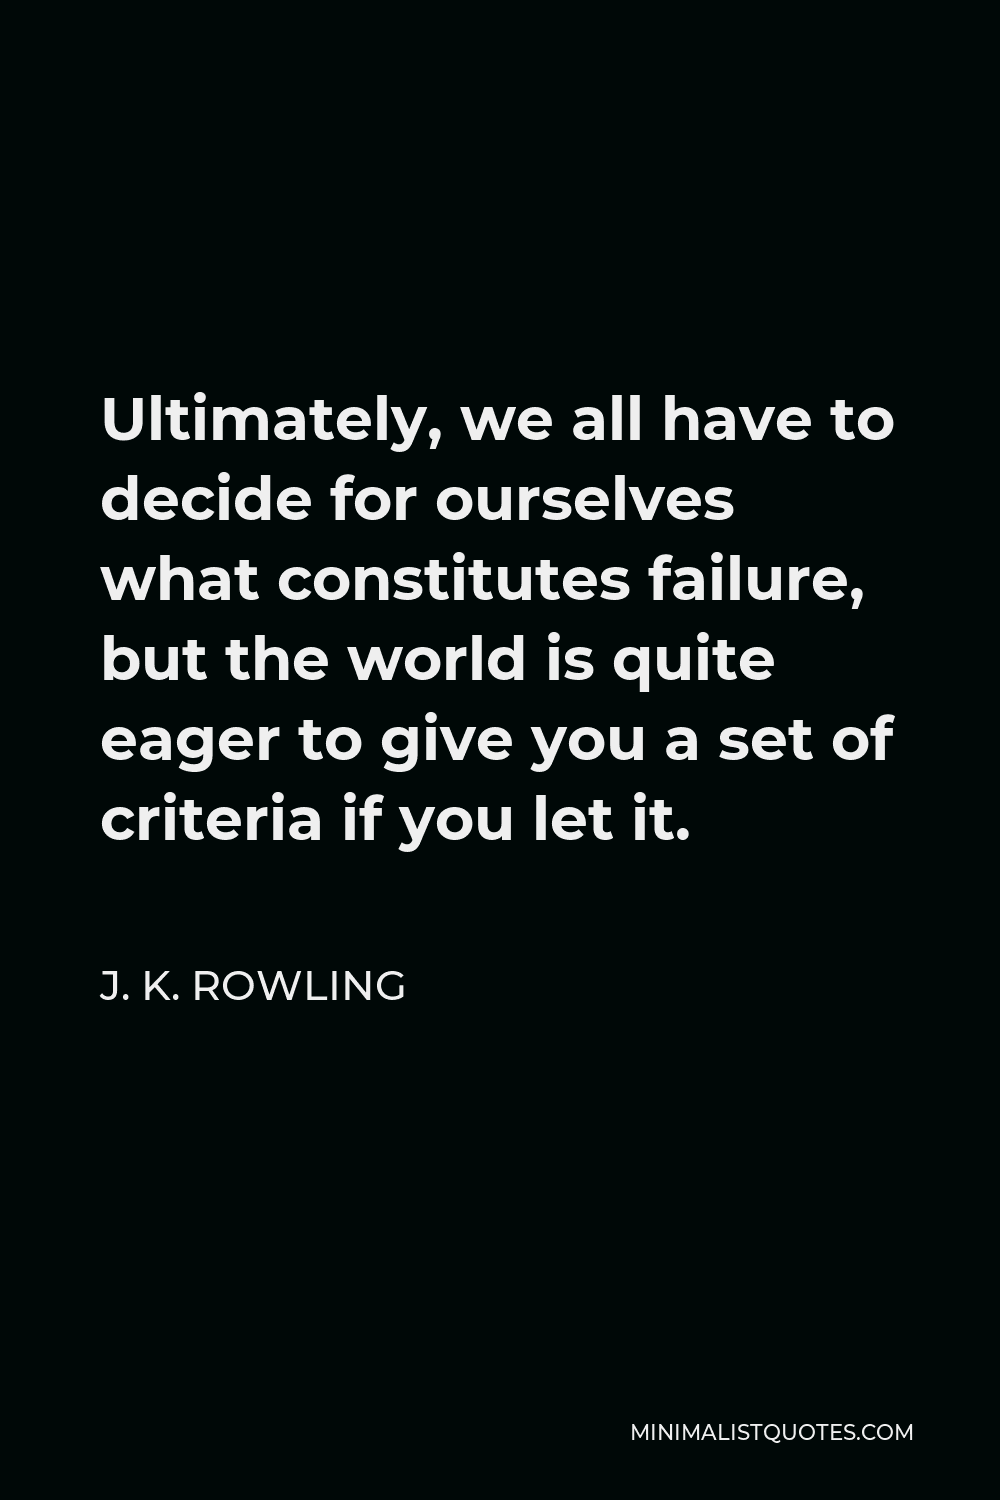 J. K. Rowling Quote - Ultimately, we all have to decide for ourselves what constitutes failure, but the world is quite eager to give you a set of criteria if you let it.